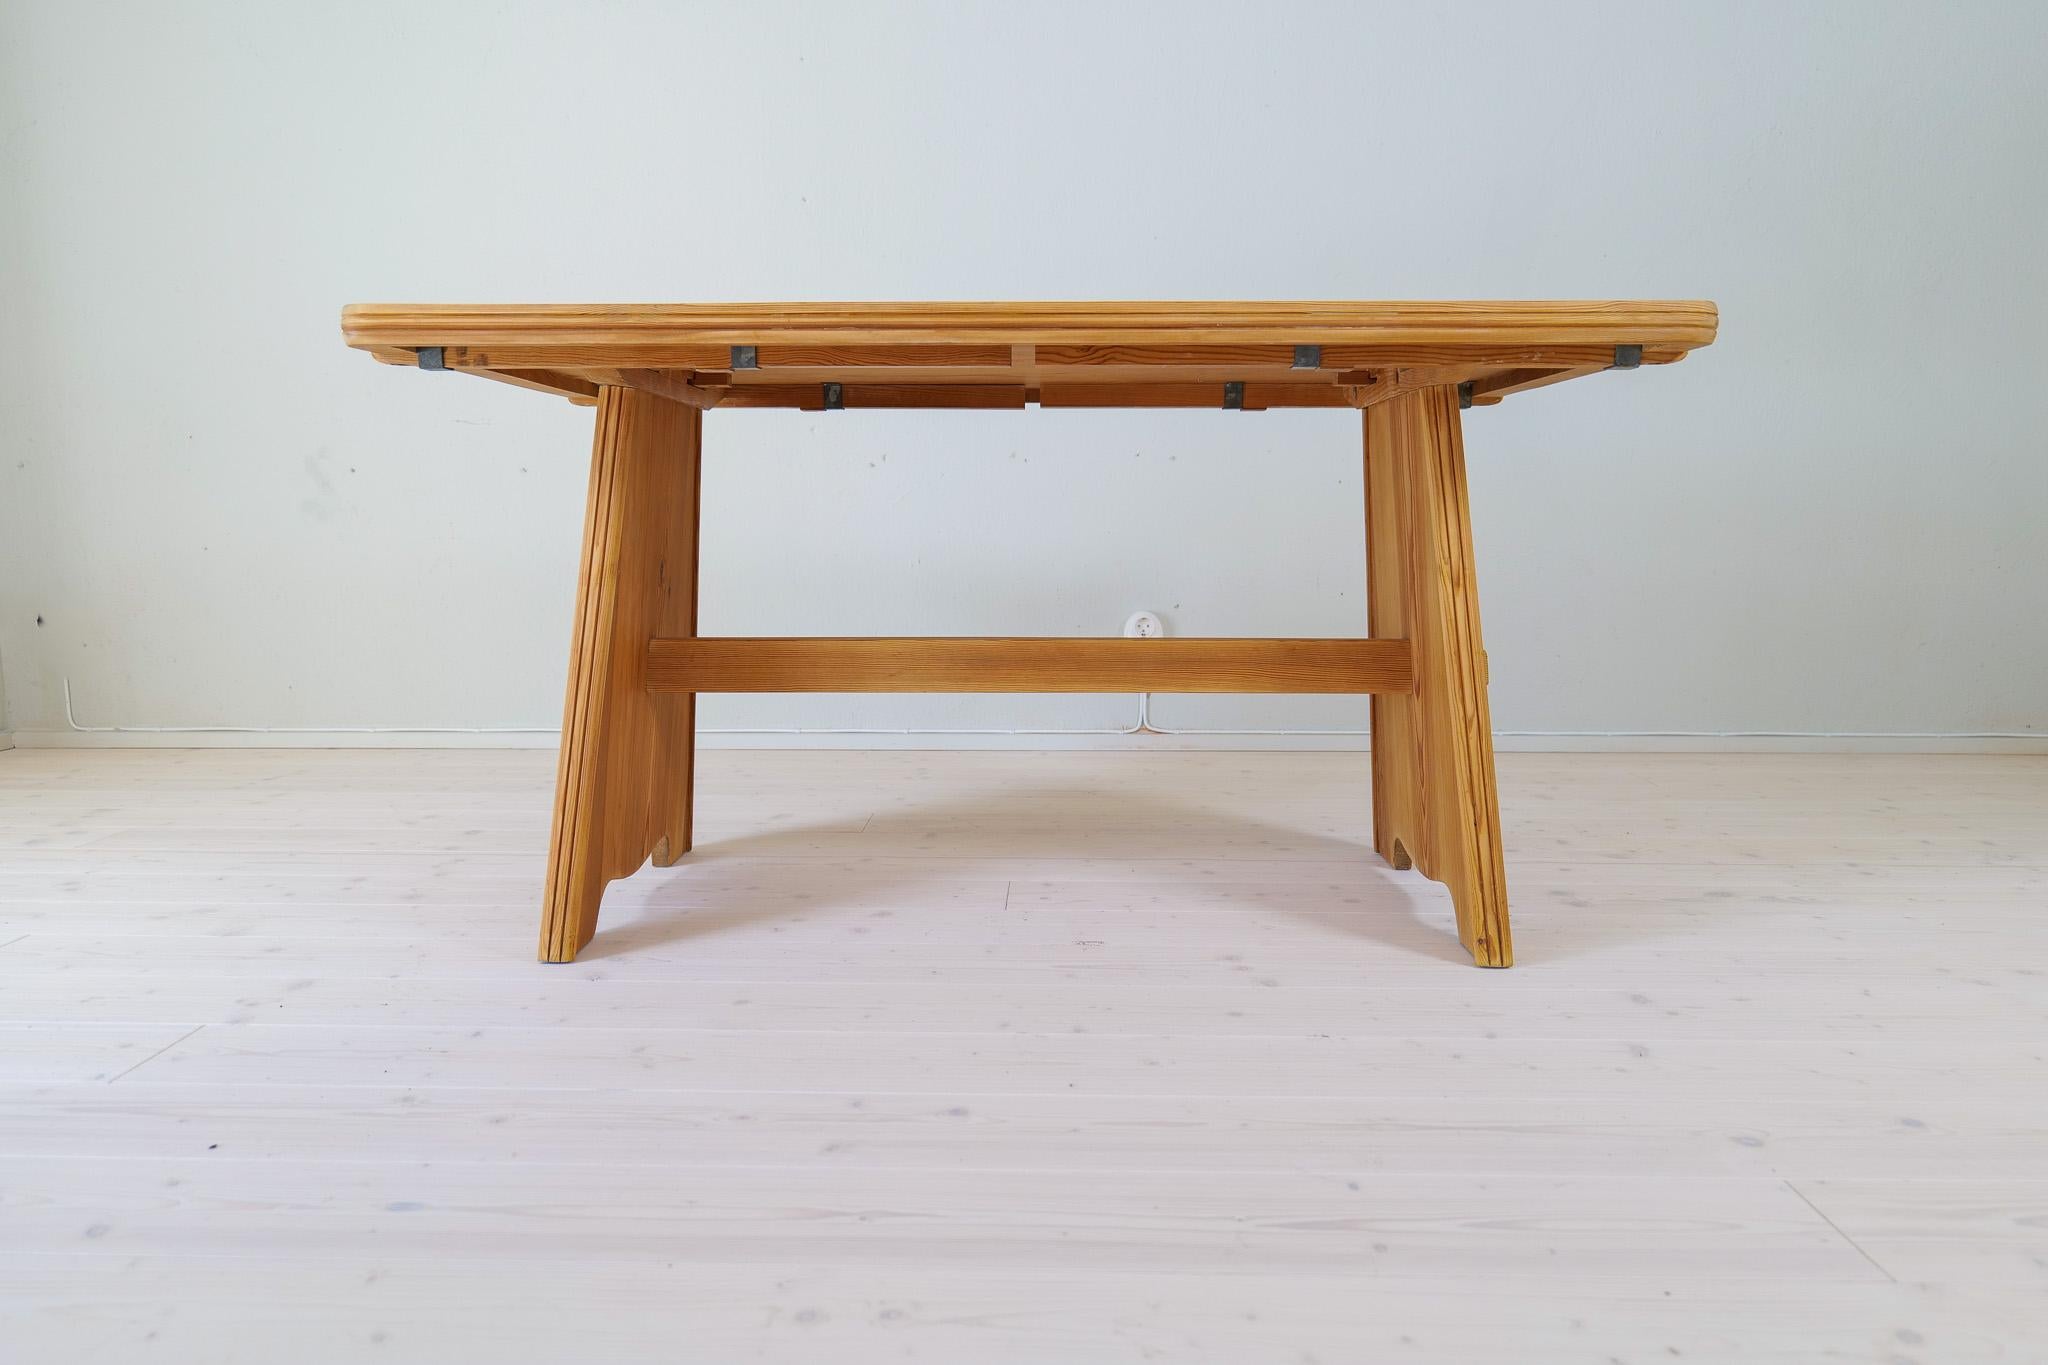 Wonderful dining table in solid pine produced in Sweden by Svensk Fur and designed by Göran Malmvall. This table is a splendid example of Swedish functional simplicity with highly skilled craftsmanship.
Good vintage condition, the table has been